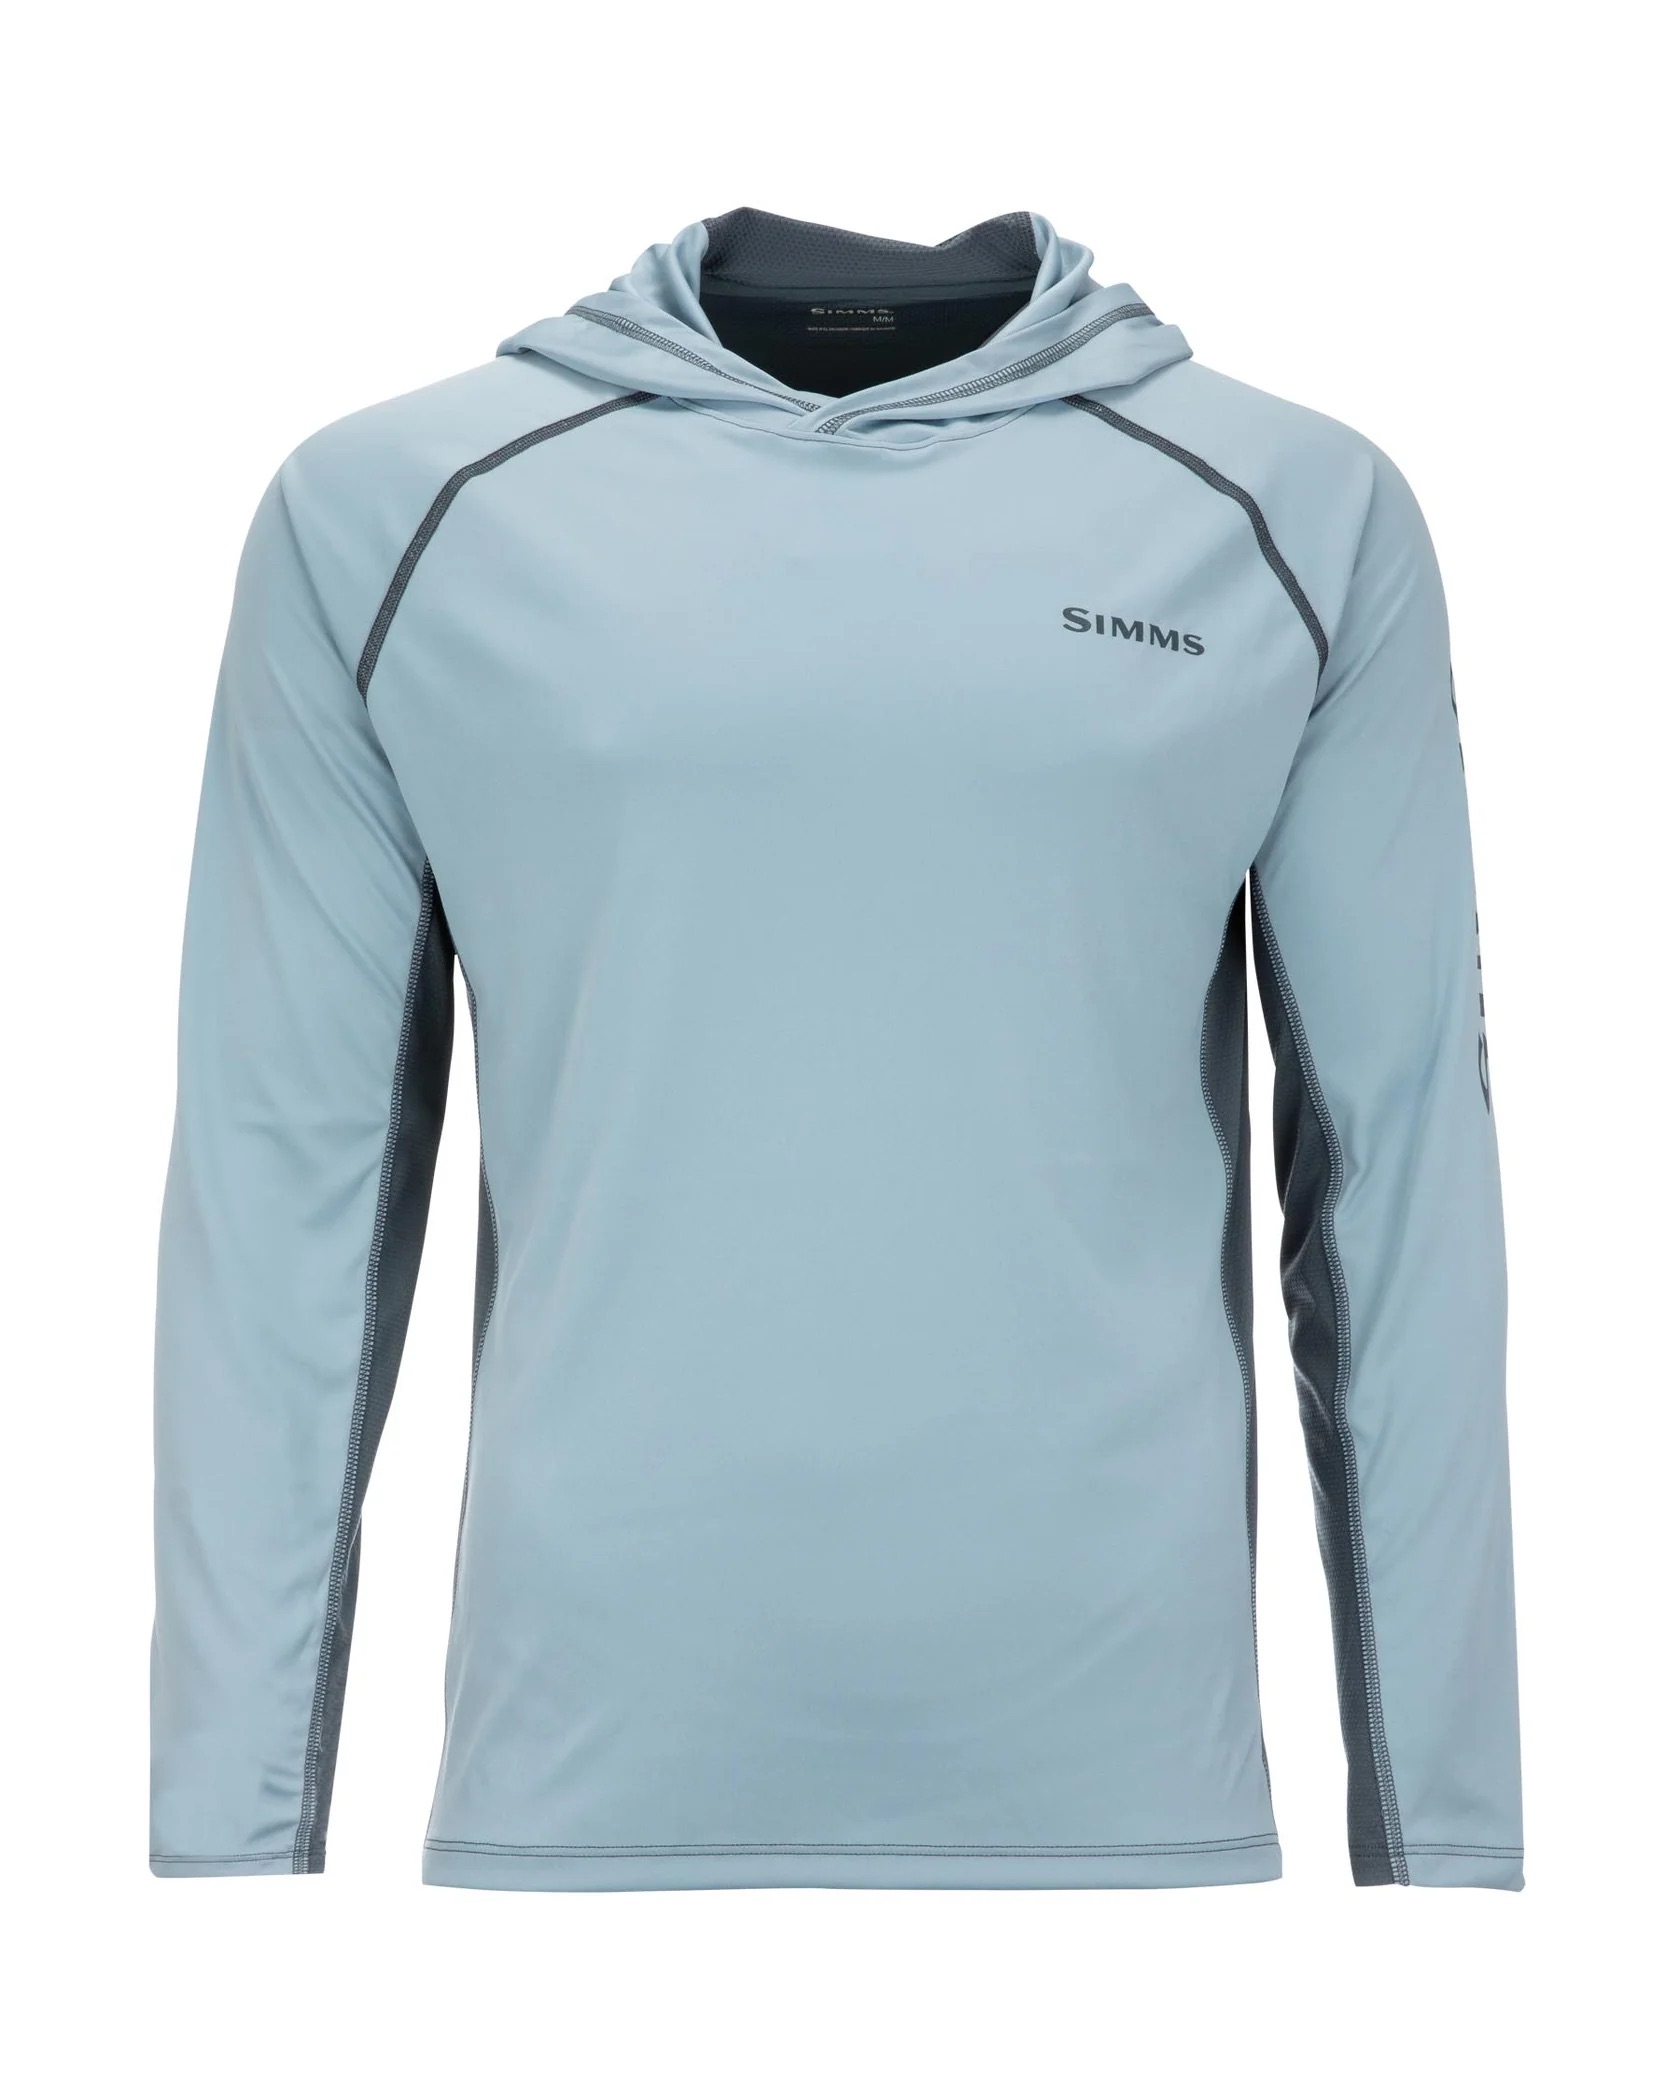 Simms M's Challenger Solar Hoody - Steel Blue/Storm - Small